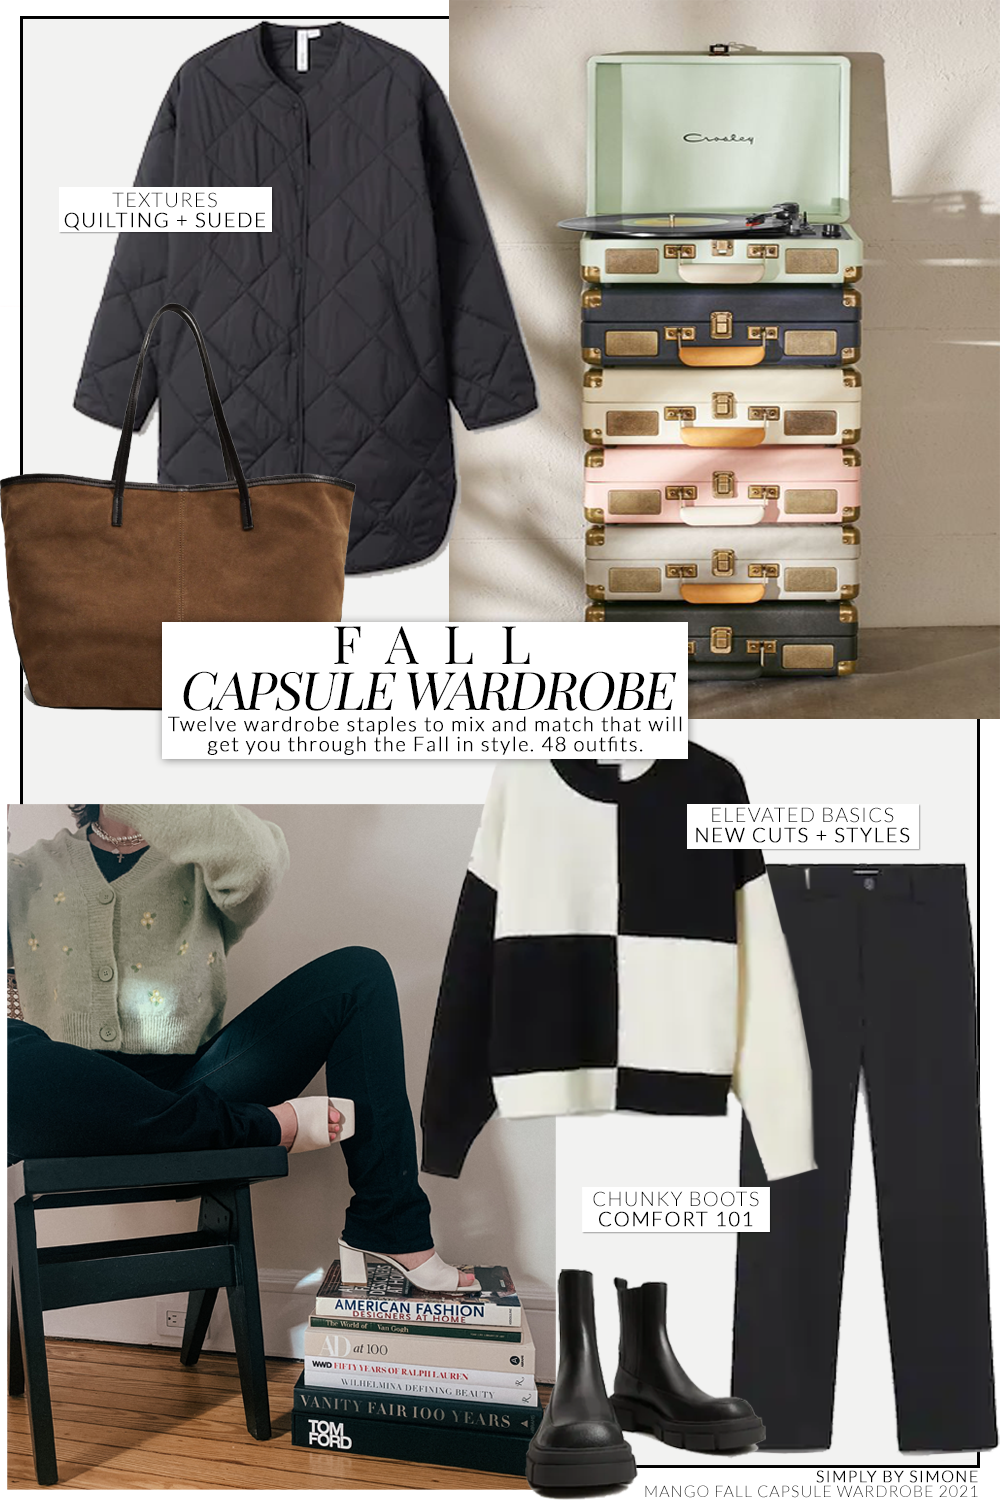 Mango Fall Capsule Wardrobe – 12 Pieces, 48 Outfits